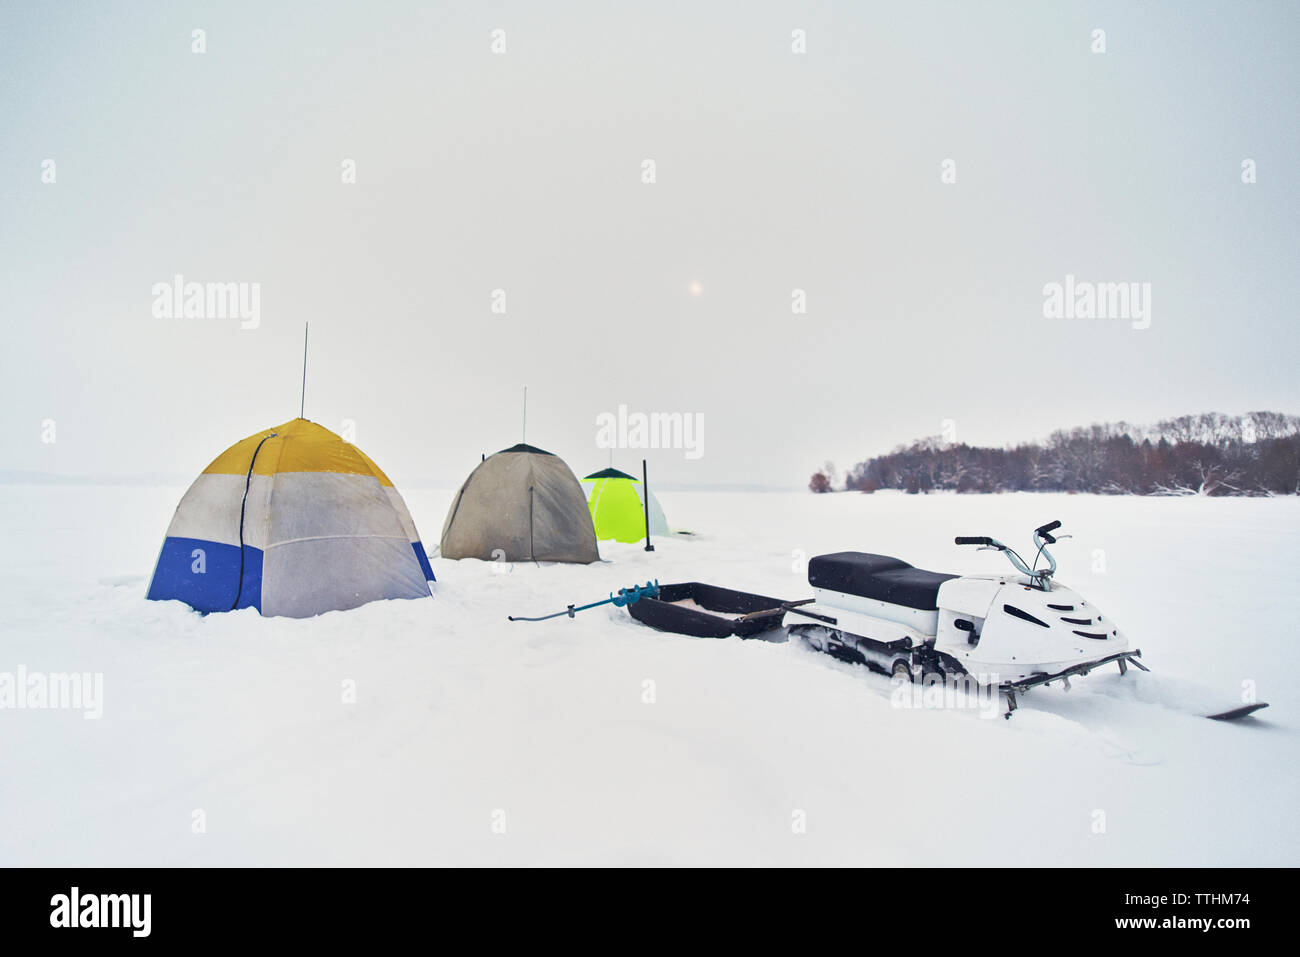 Snowmobile and tents on field against clear sky during winter Stock Photo